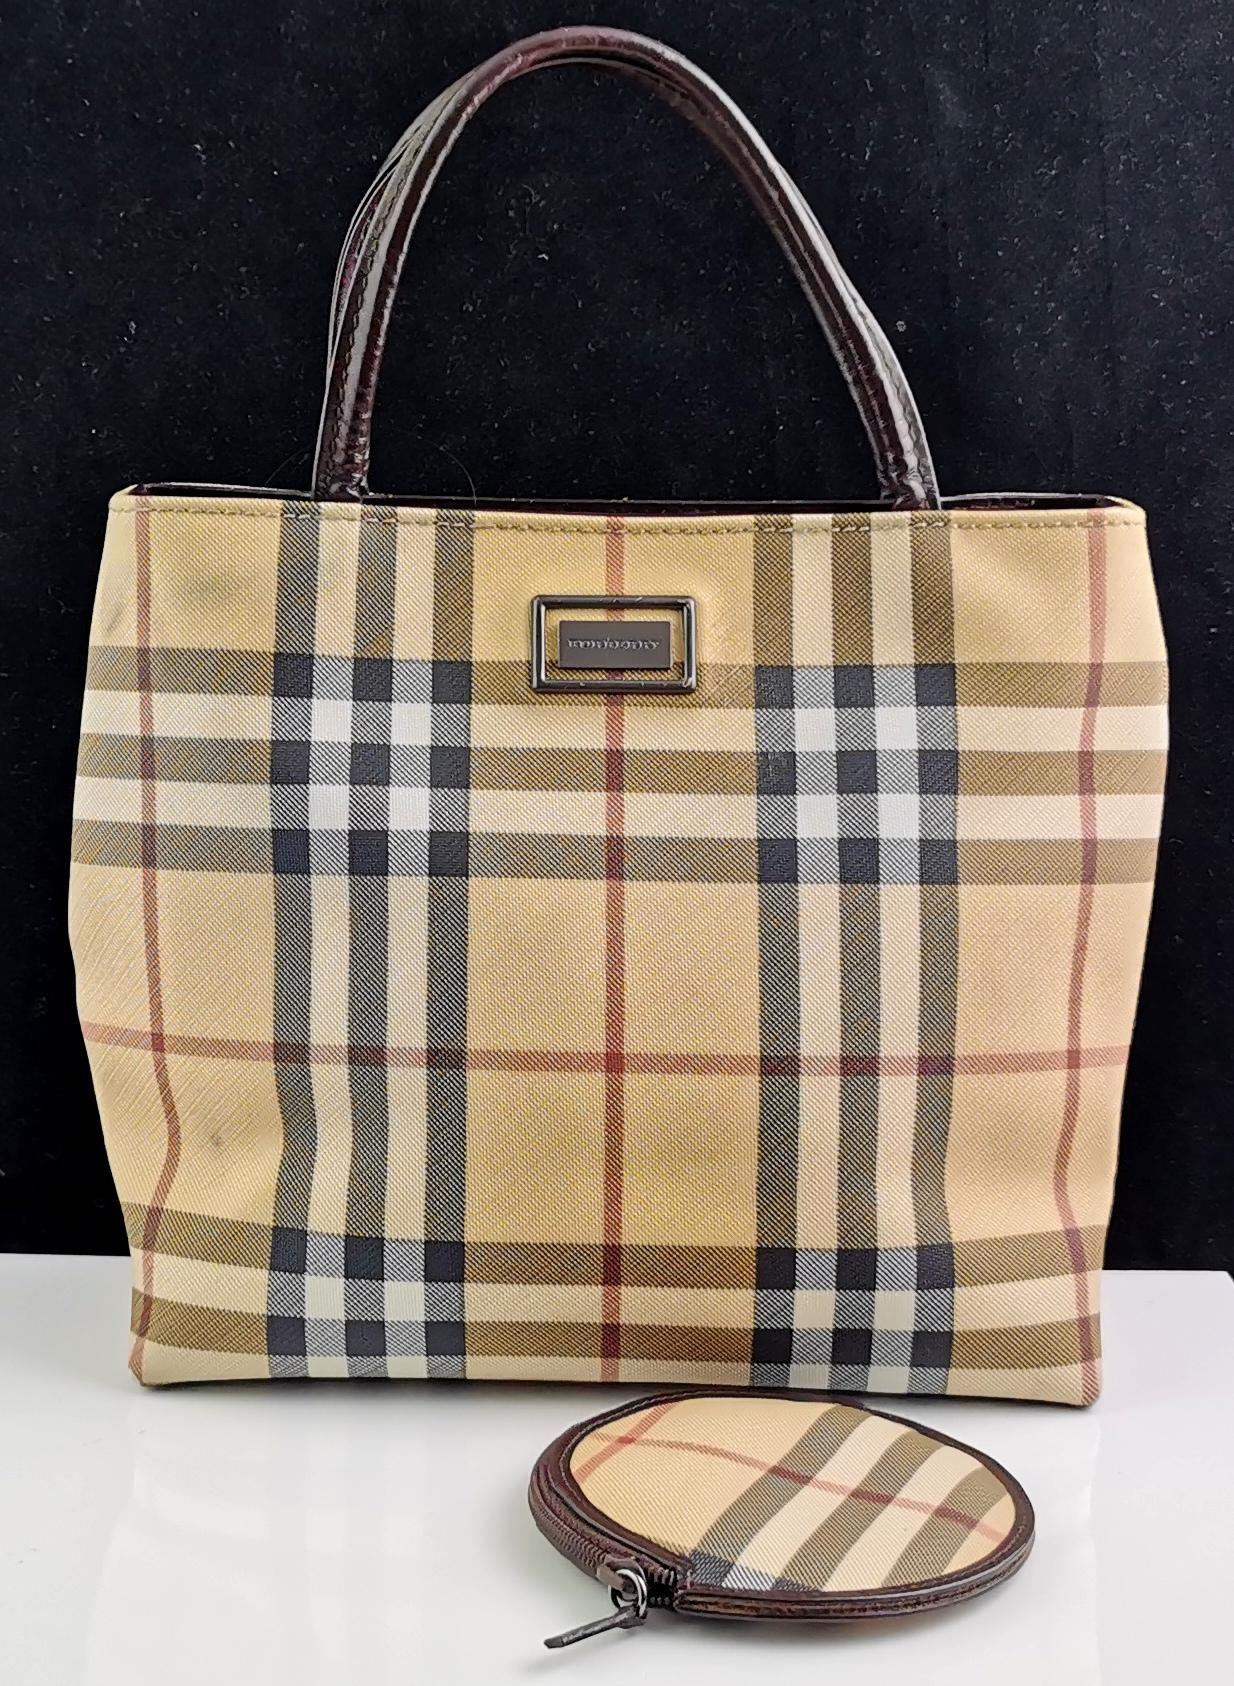 A stylish vintage Burberry mini tote bag with a matching coin purse.

Classic Nova check in a lightly coated canvas.

It has dark brown leather top handles and brown tone metal hardware branded.

Inside the purse there is the Burberry branding on a